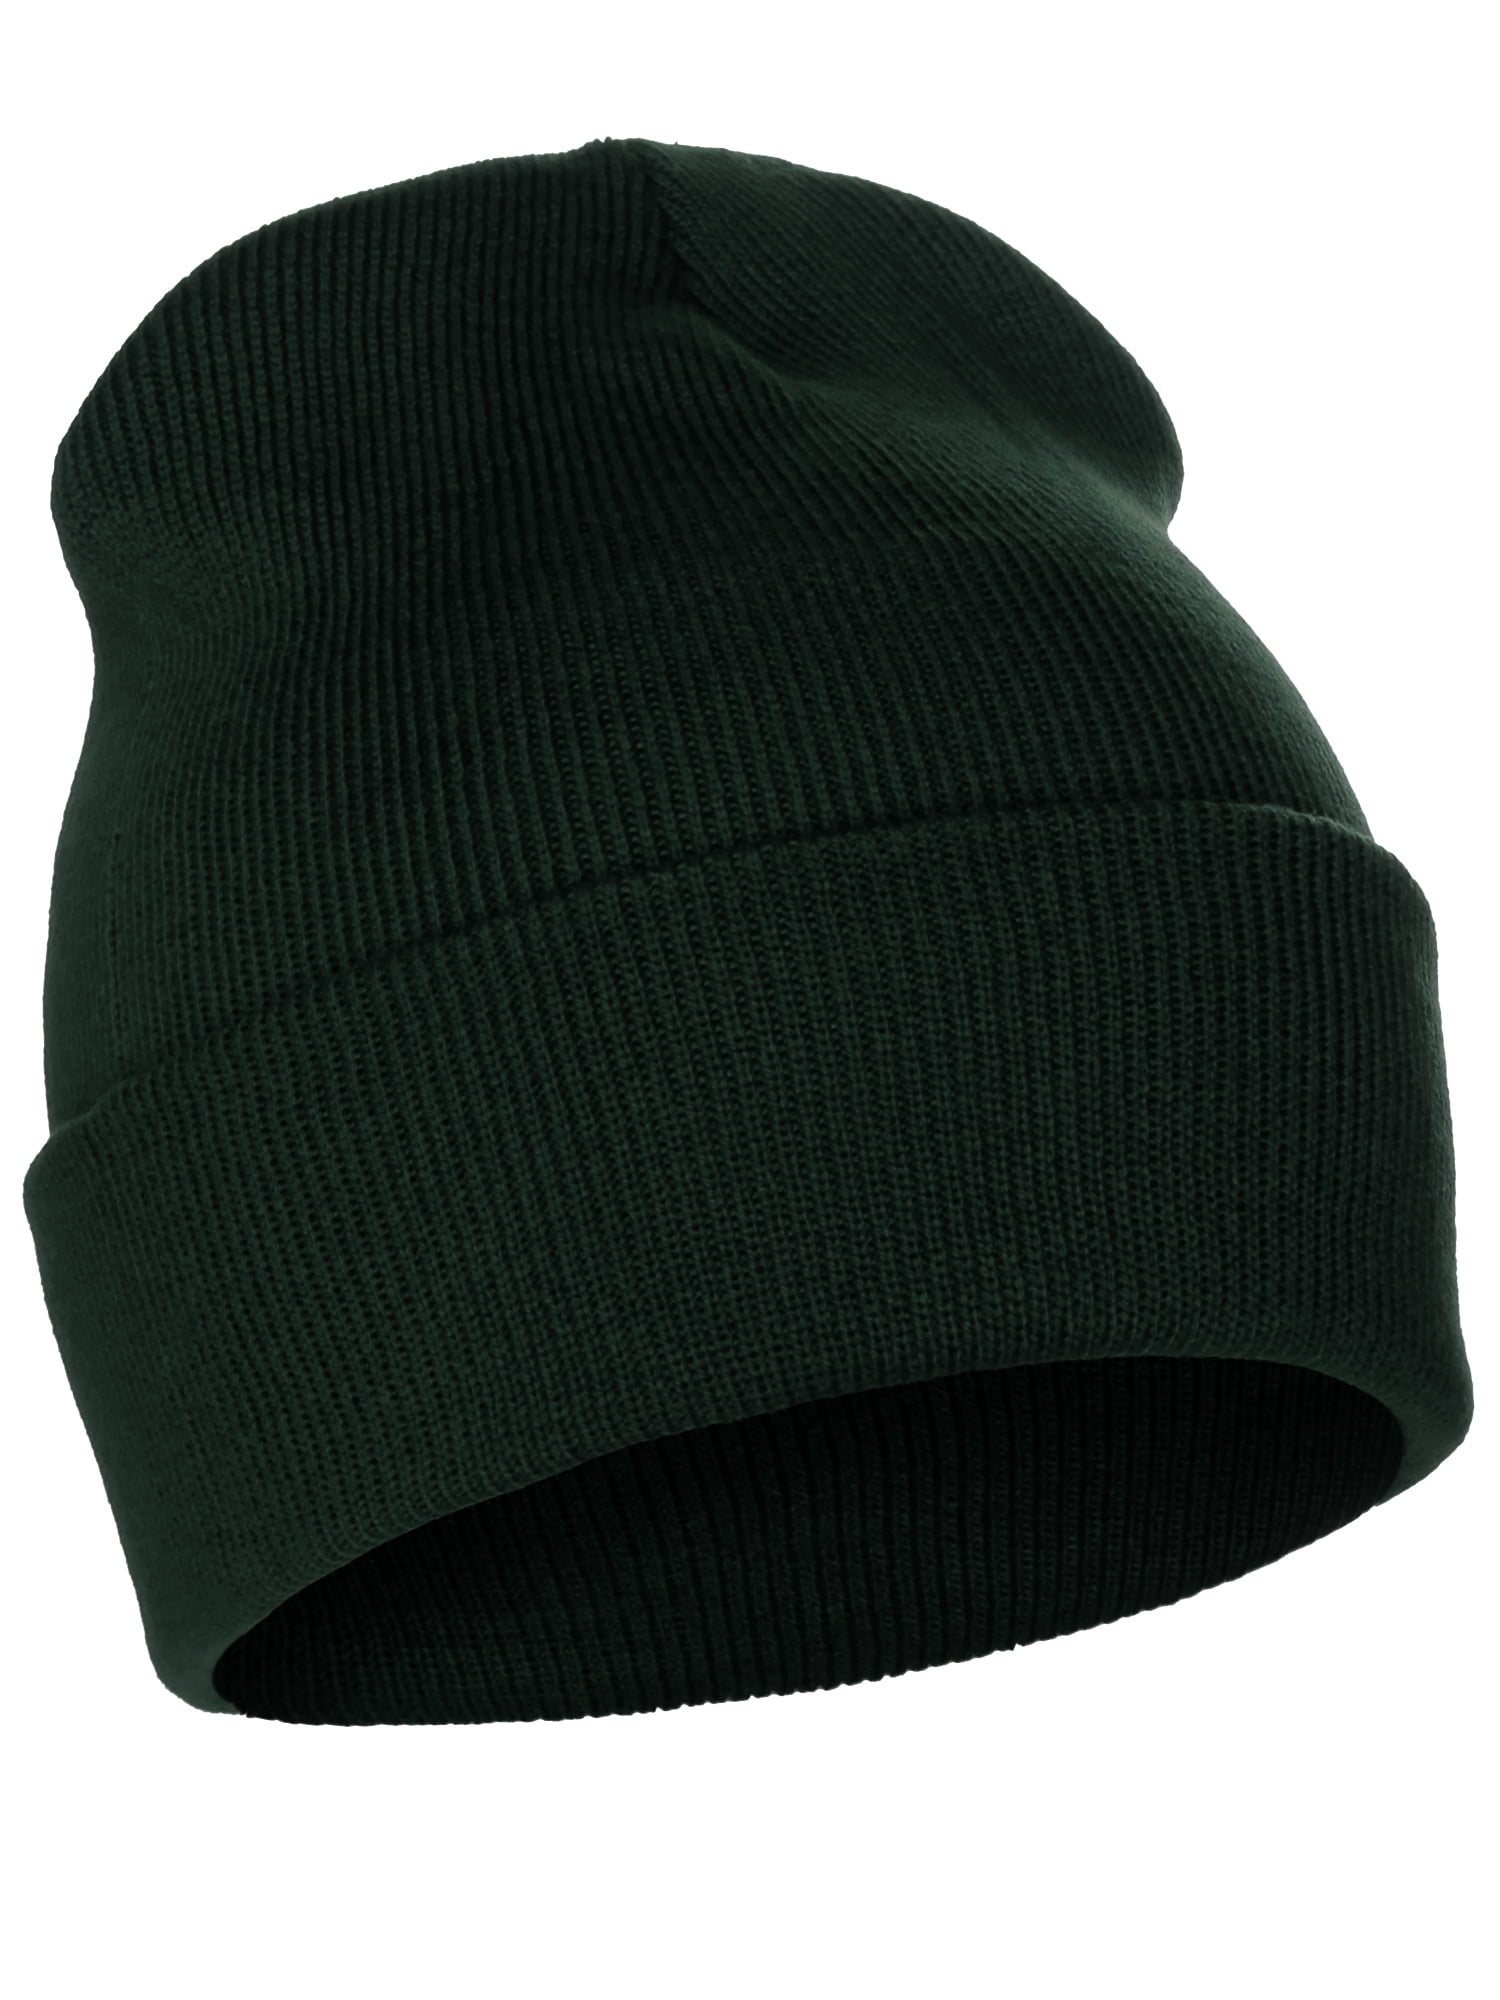 Hat Turquoise Knit Beanie Plain Winter Classic Skully Cap, Cuffed